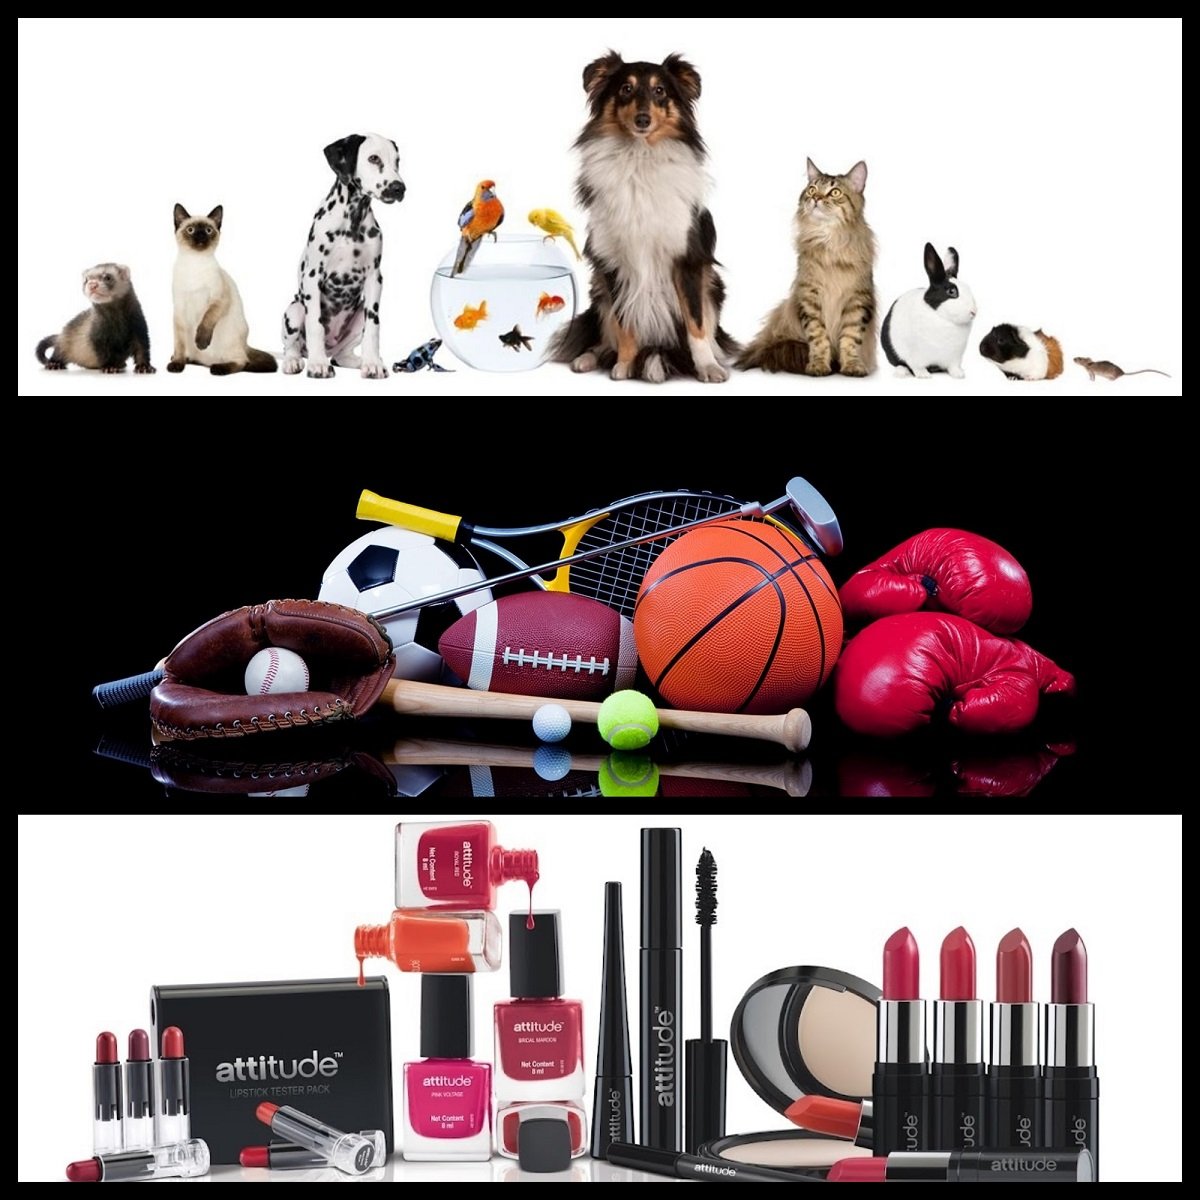 gift ideas pets sports items cosmetics makeup selfgrooming 1 1